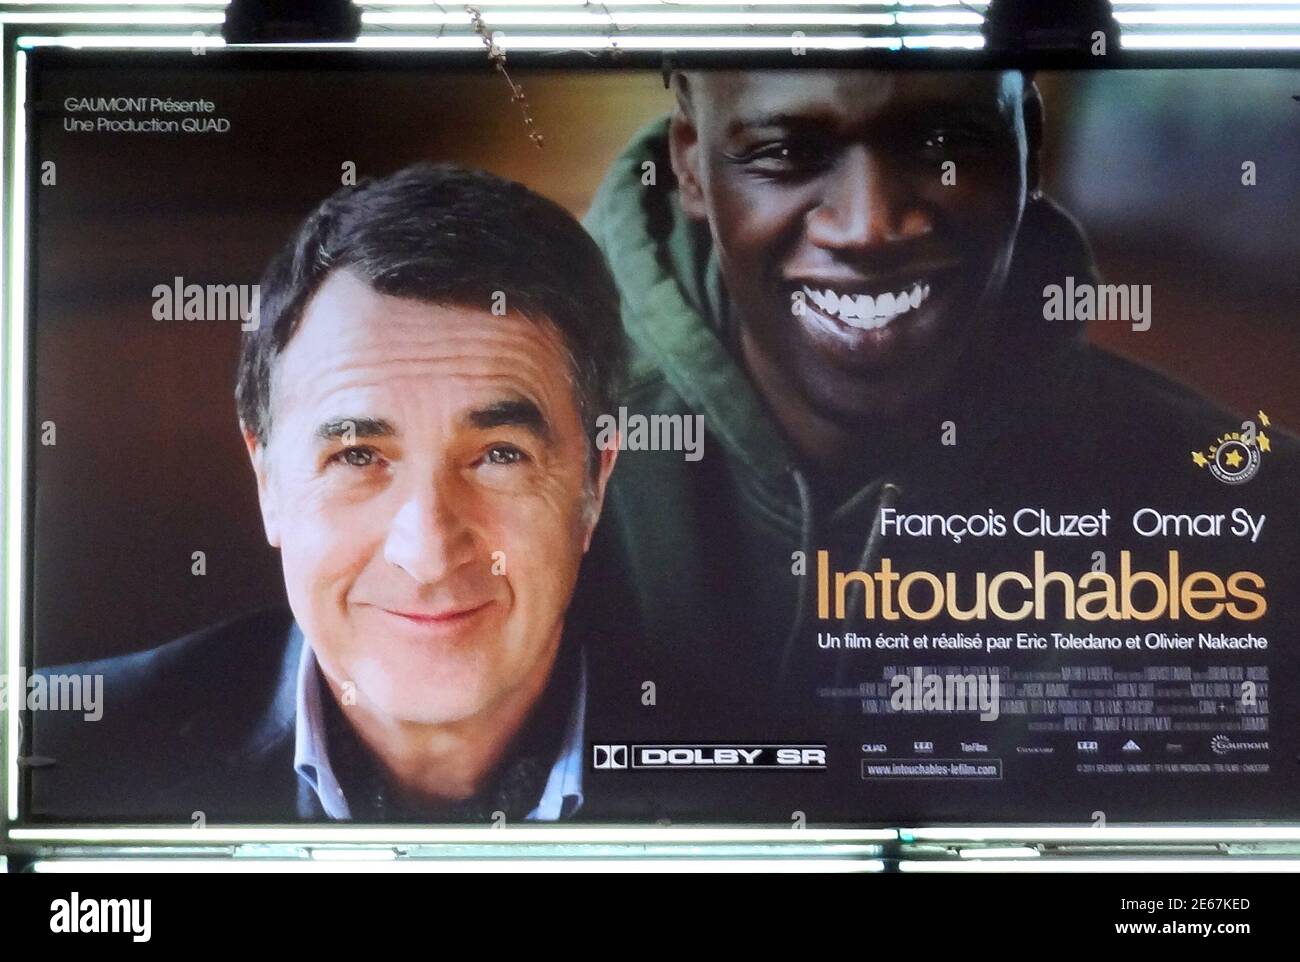 French actors Francois Cluzet (L) and Omar Sy (R) are seen on the movie  poster of the film "Intouchables" at a movie theatre in Paris January 3,  2012. Cluzet plays the role